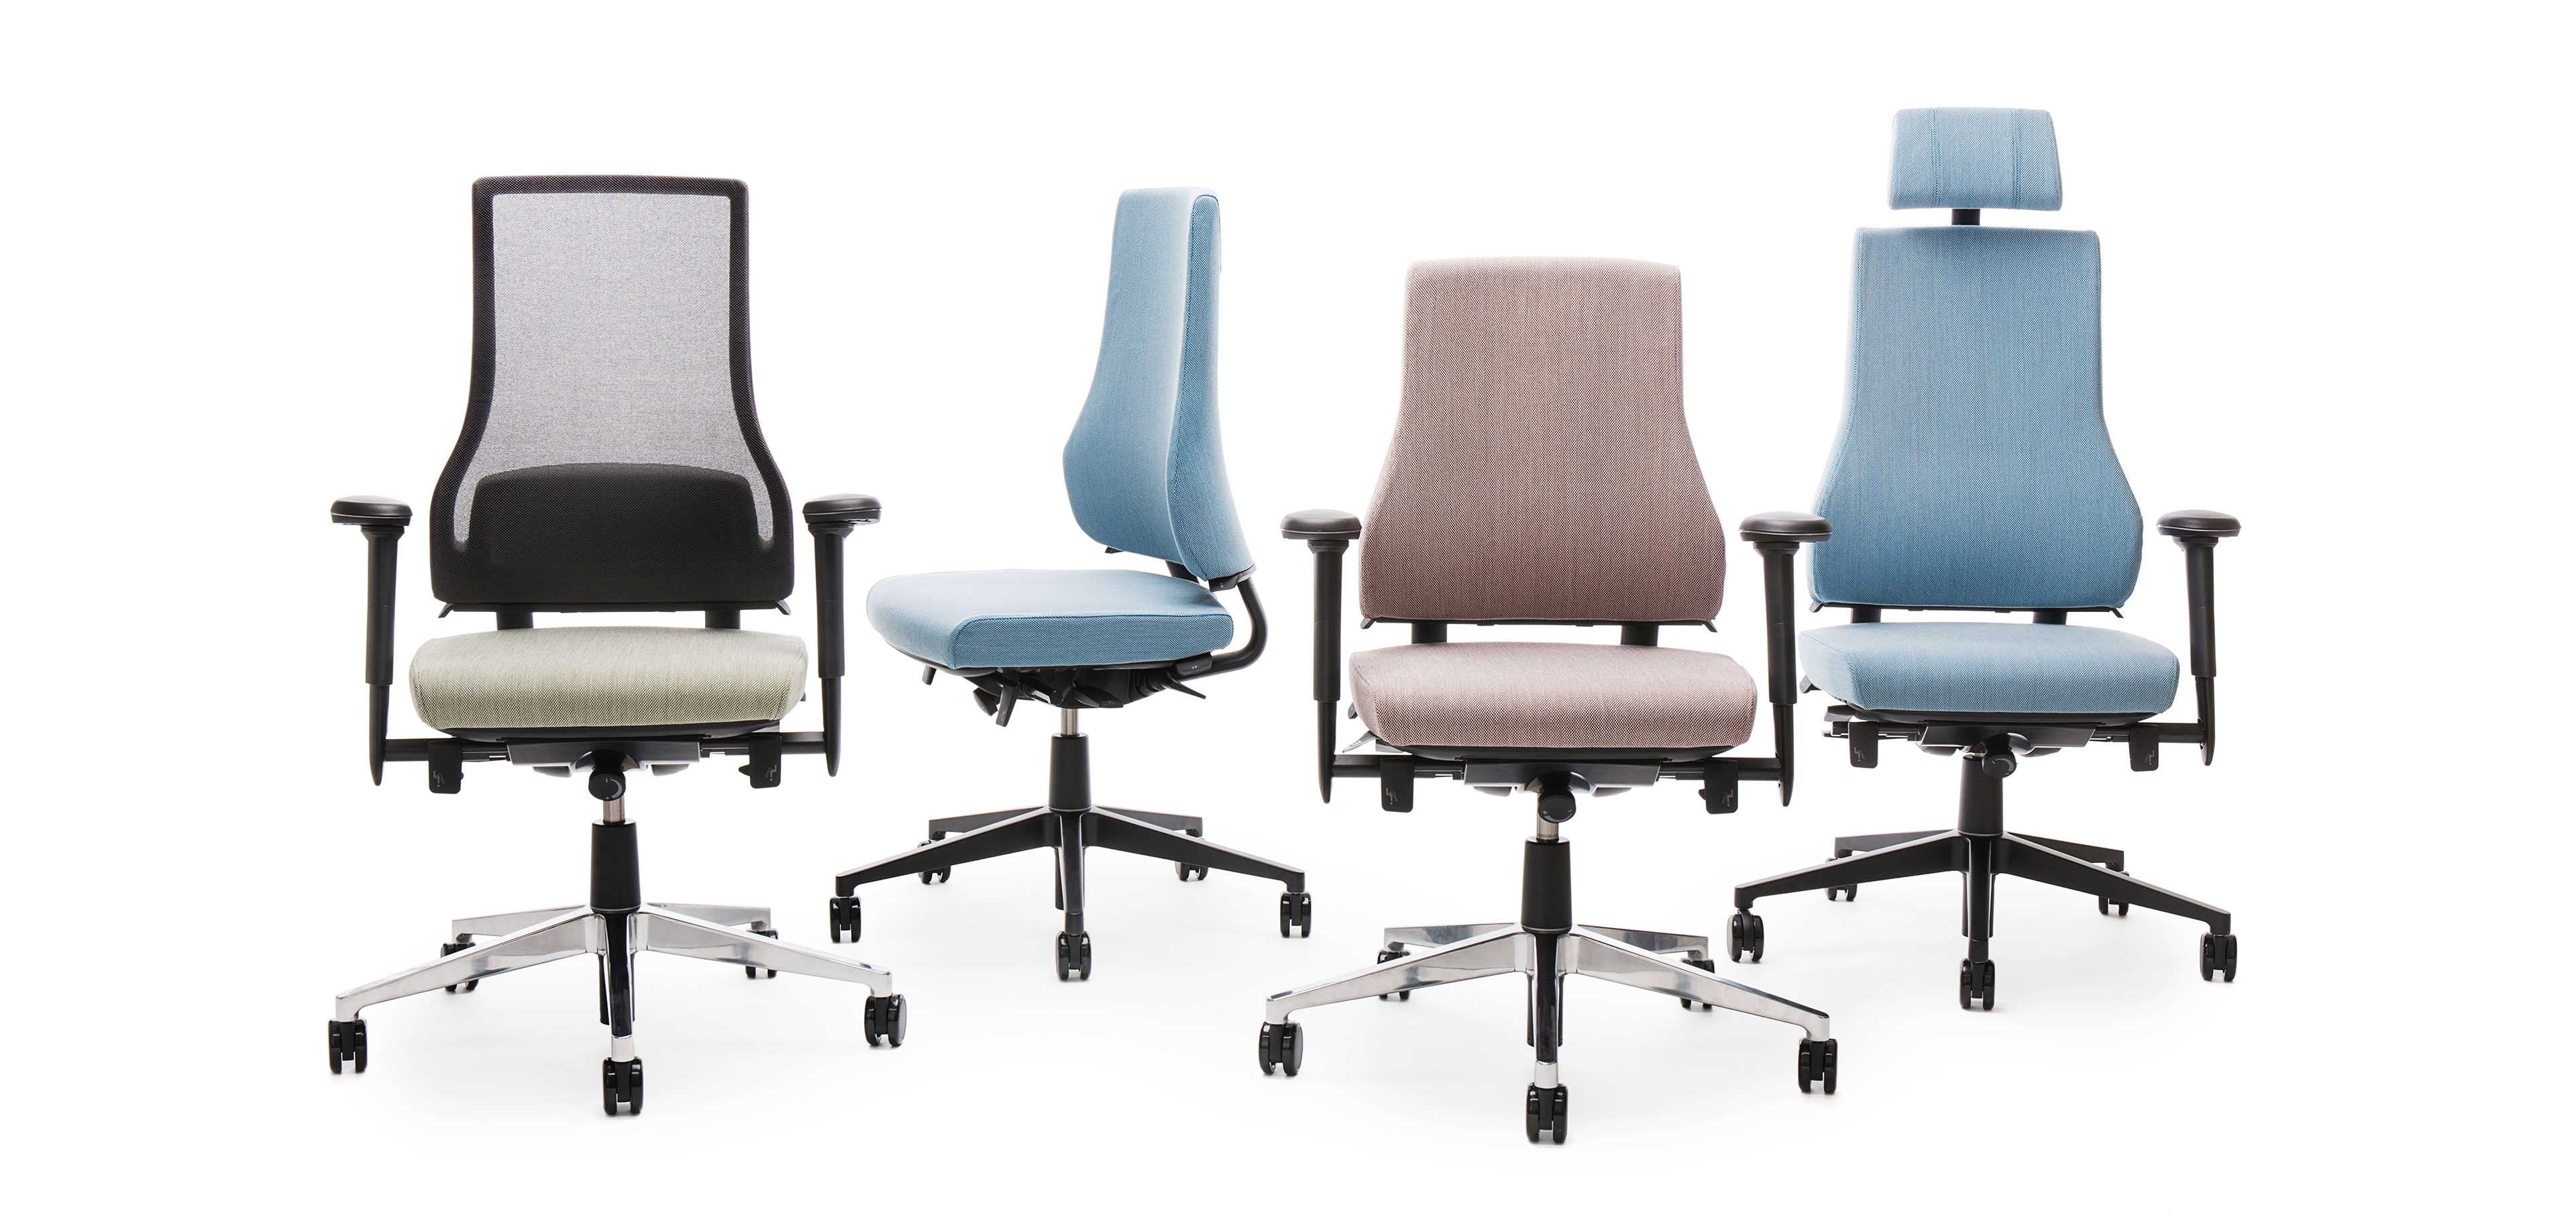 Task chairs by Martela